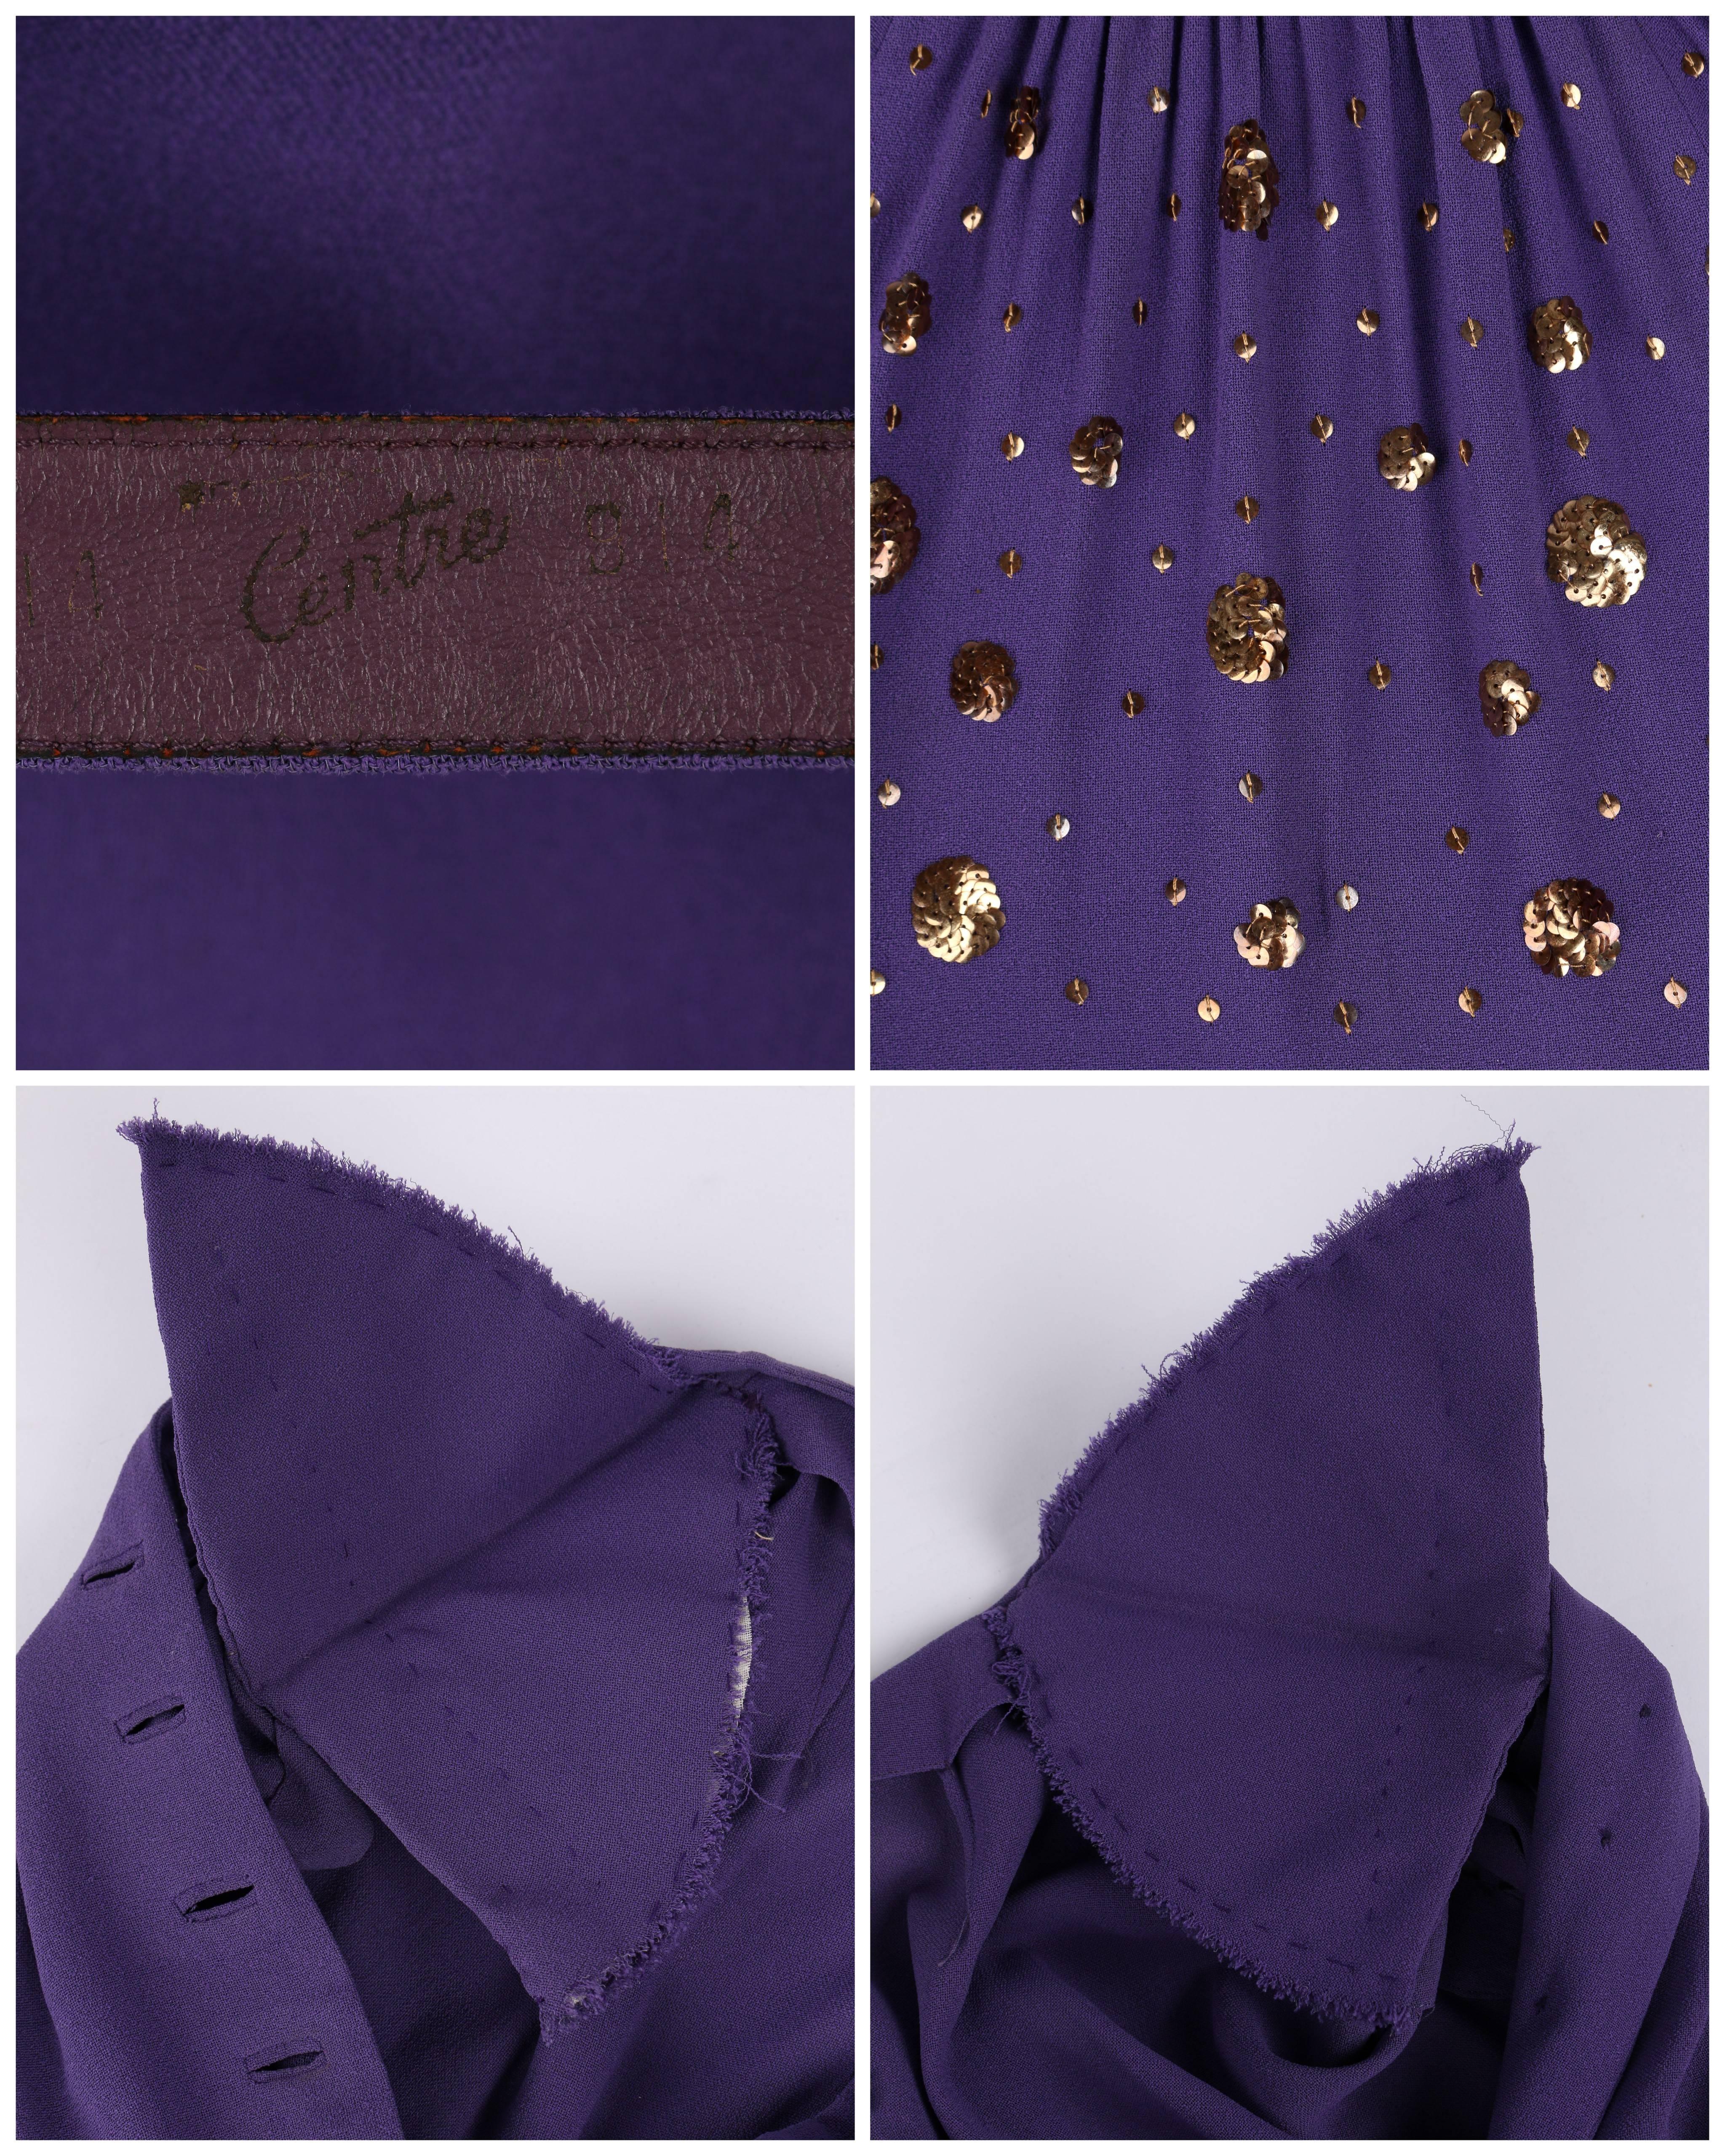 COUTURE c.1940's Purple Gold Belted Sequin Embellished Evening Dress Gown For Sale 1